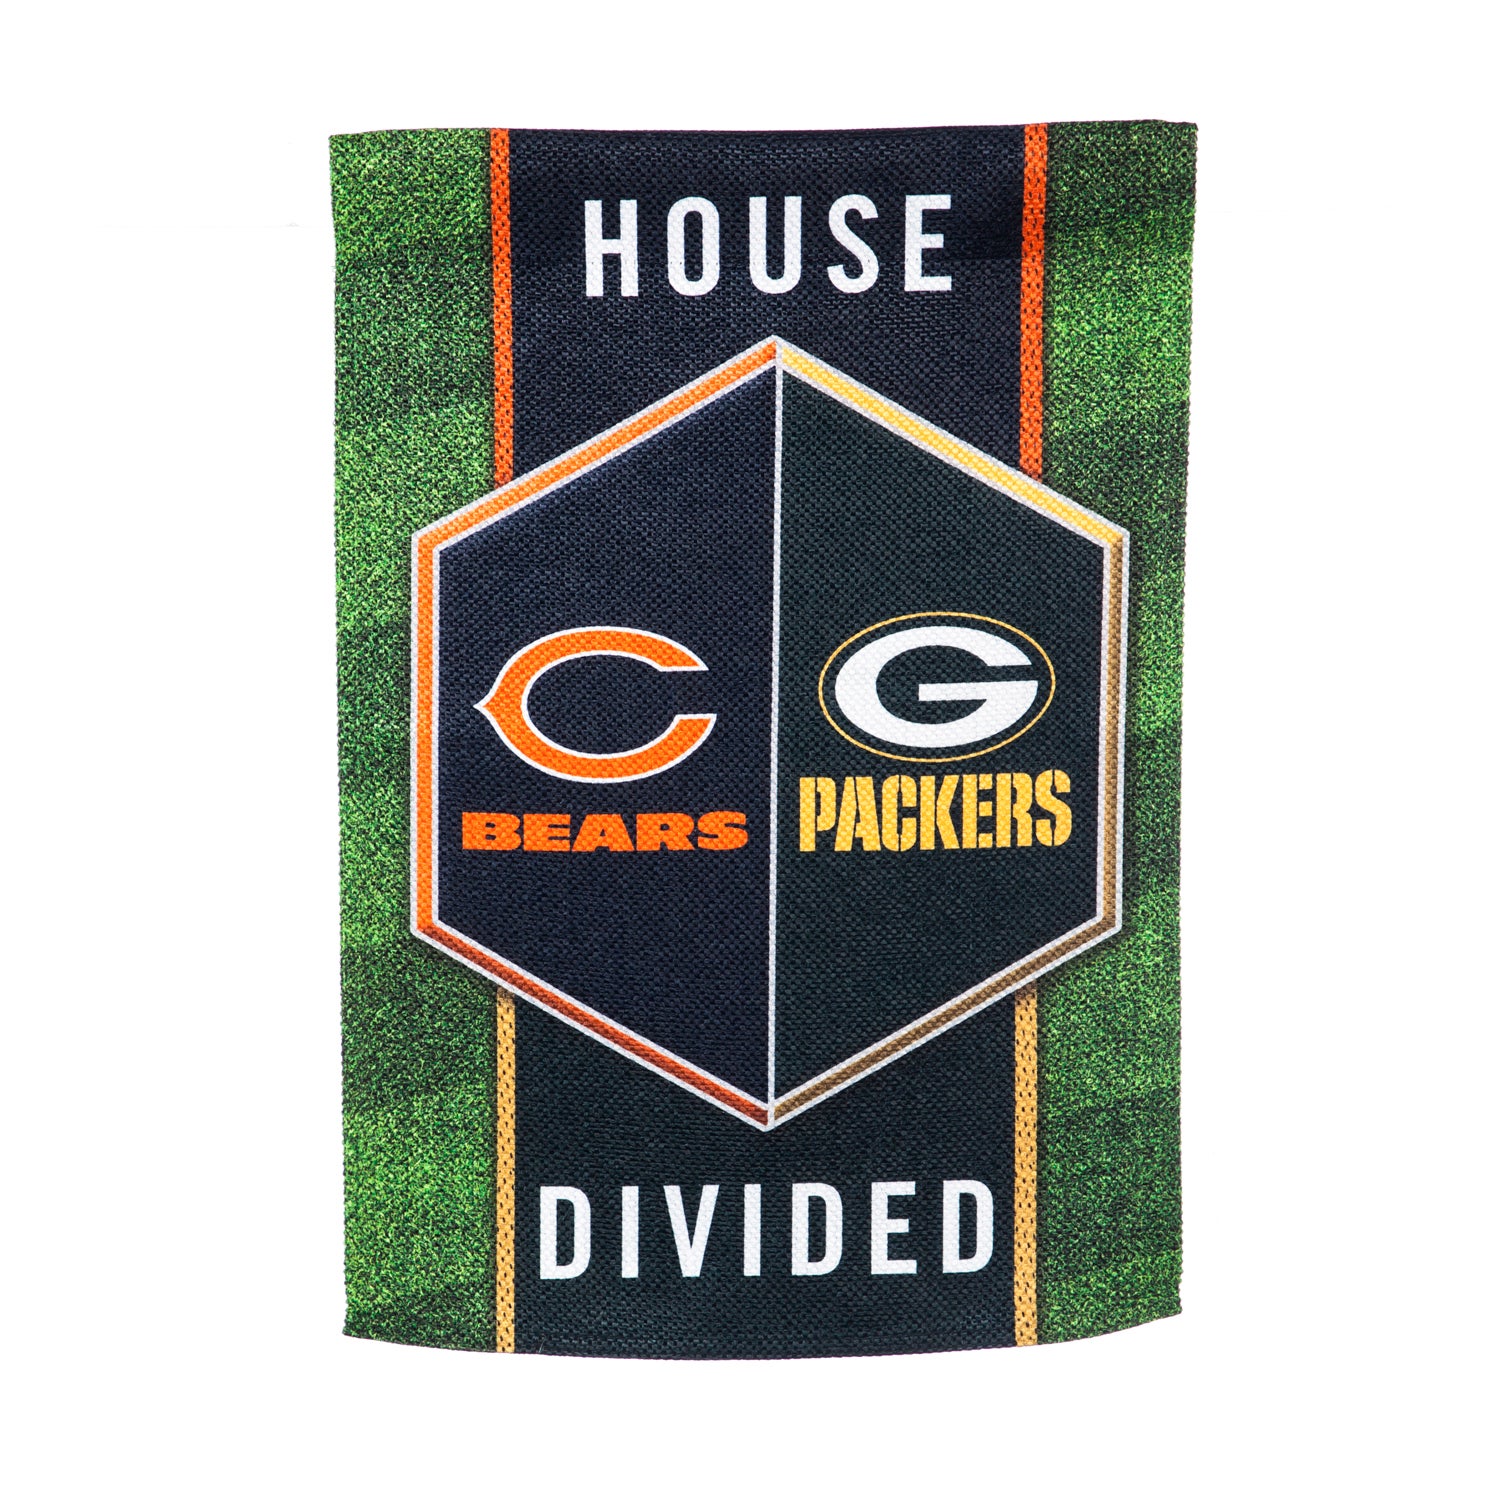 Packers, Bears House Divided Suede Garden Flag